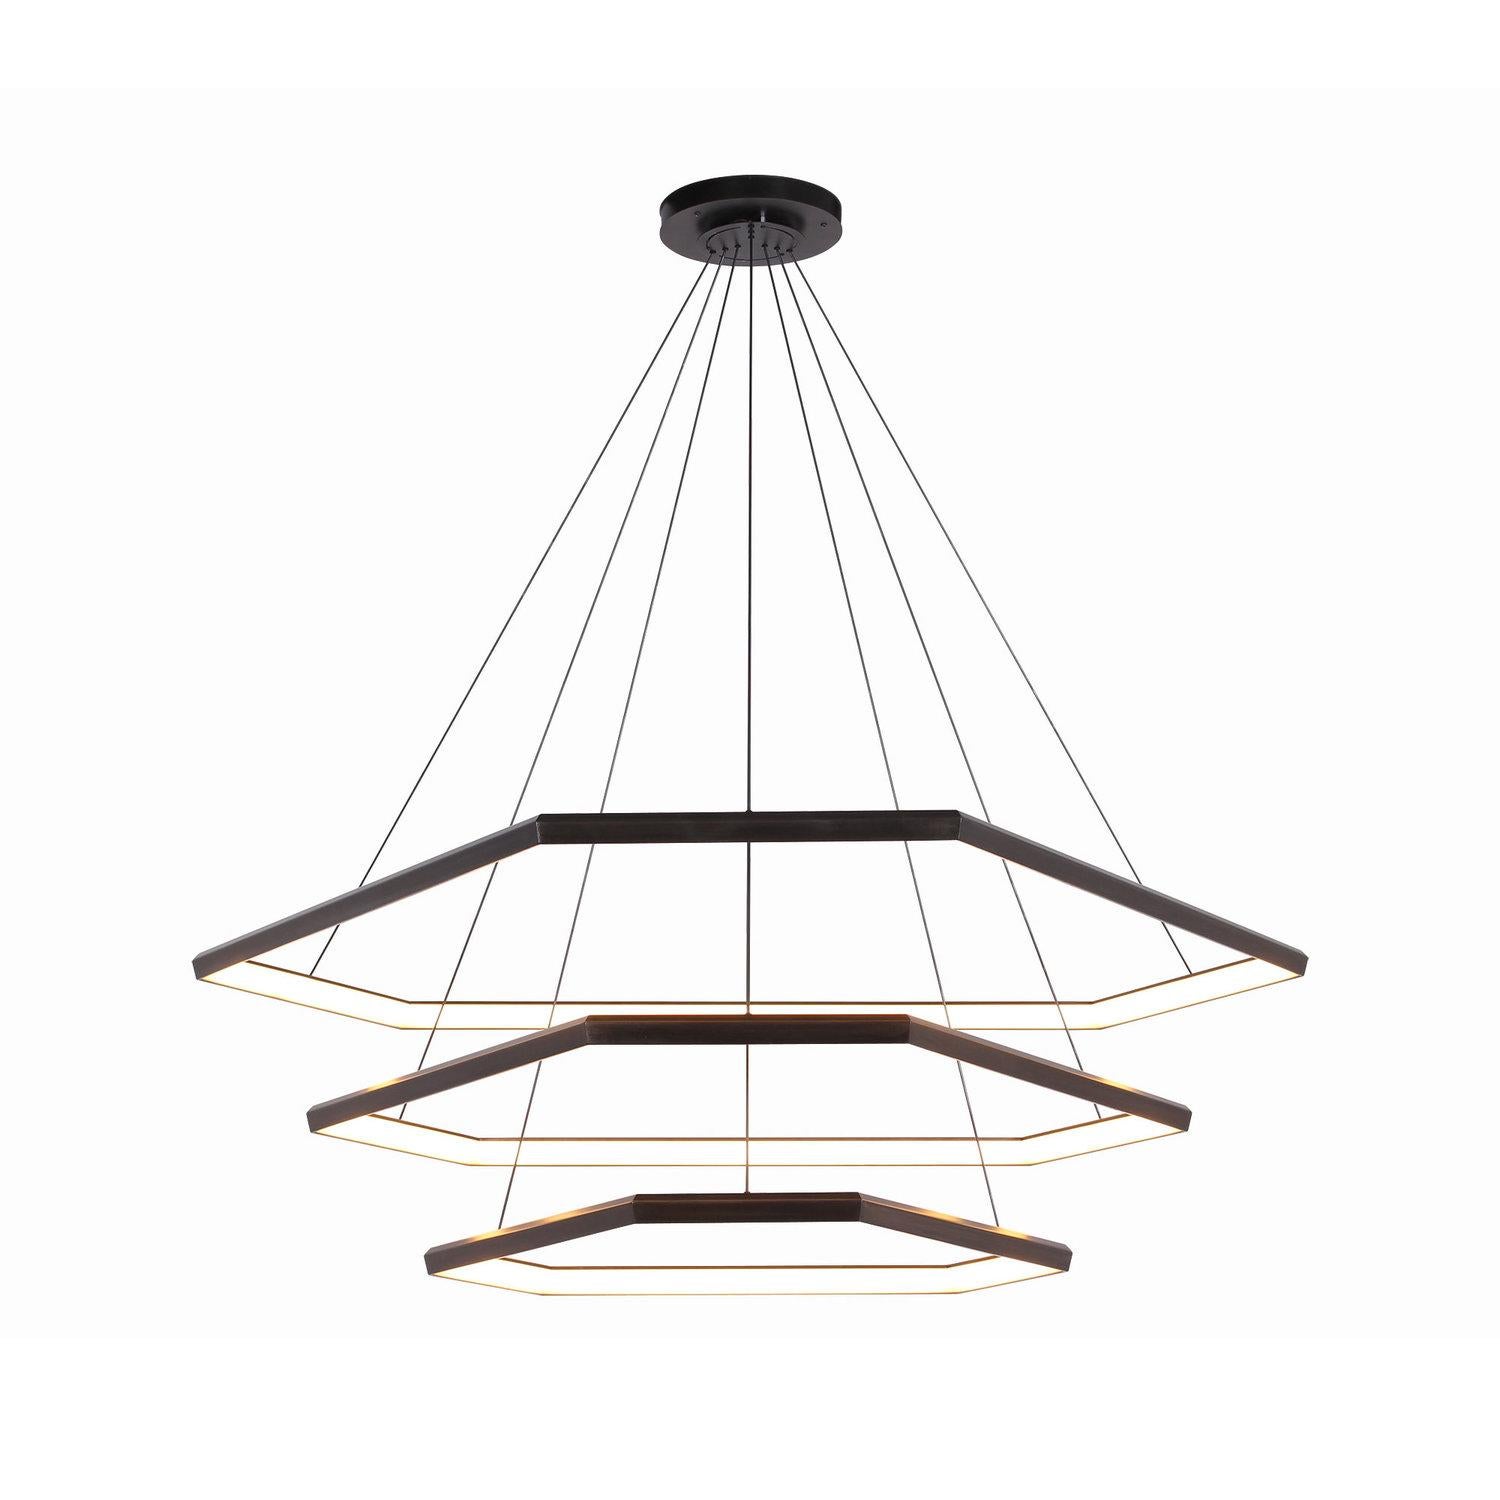 DITRI takes the form of a sleek ditrigon, a blend between a convex hexagon and a triangle. This line was inspired by the flawless natural form of the ditrigonal snowflake. This triple tiered fixture is a natural volumetric progression of the DITRI